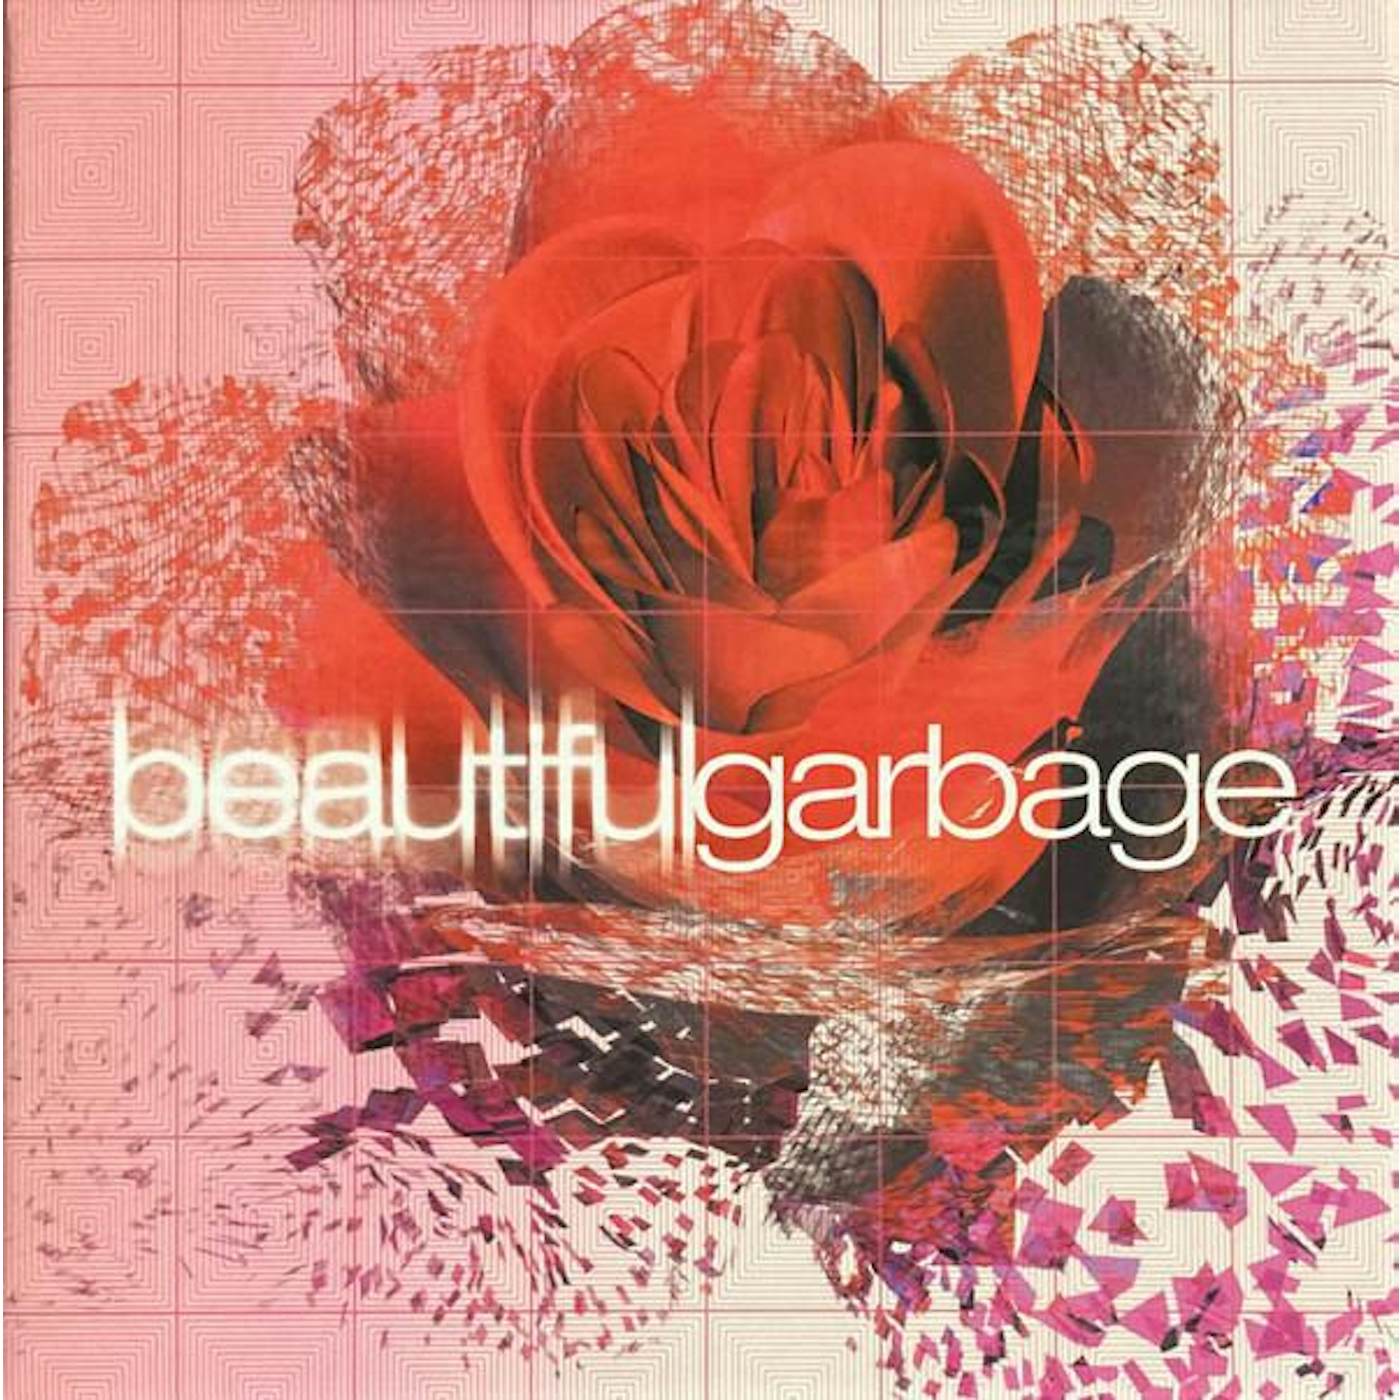 BEAUTIFULGARBAGE (3CD/DELUXE EDITION/REMASTERED/B-SIDES/DEMOS & REMIXES/DELUXE CLAMSHELL/IMPORT) CD